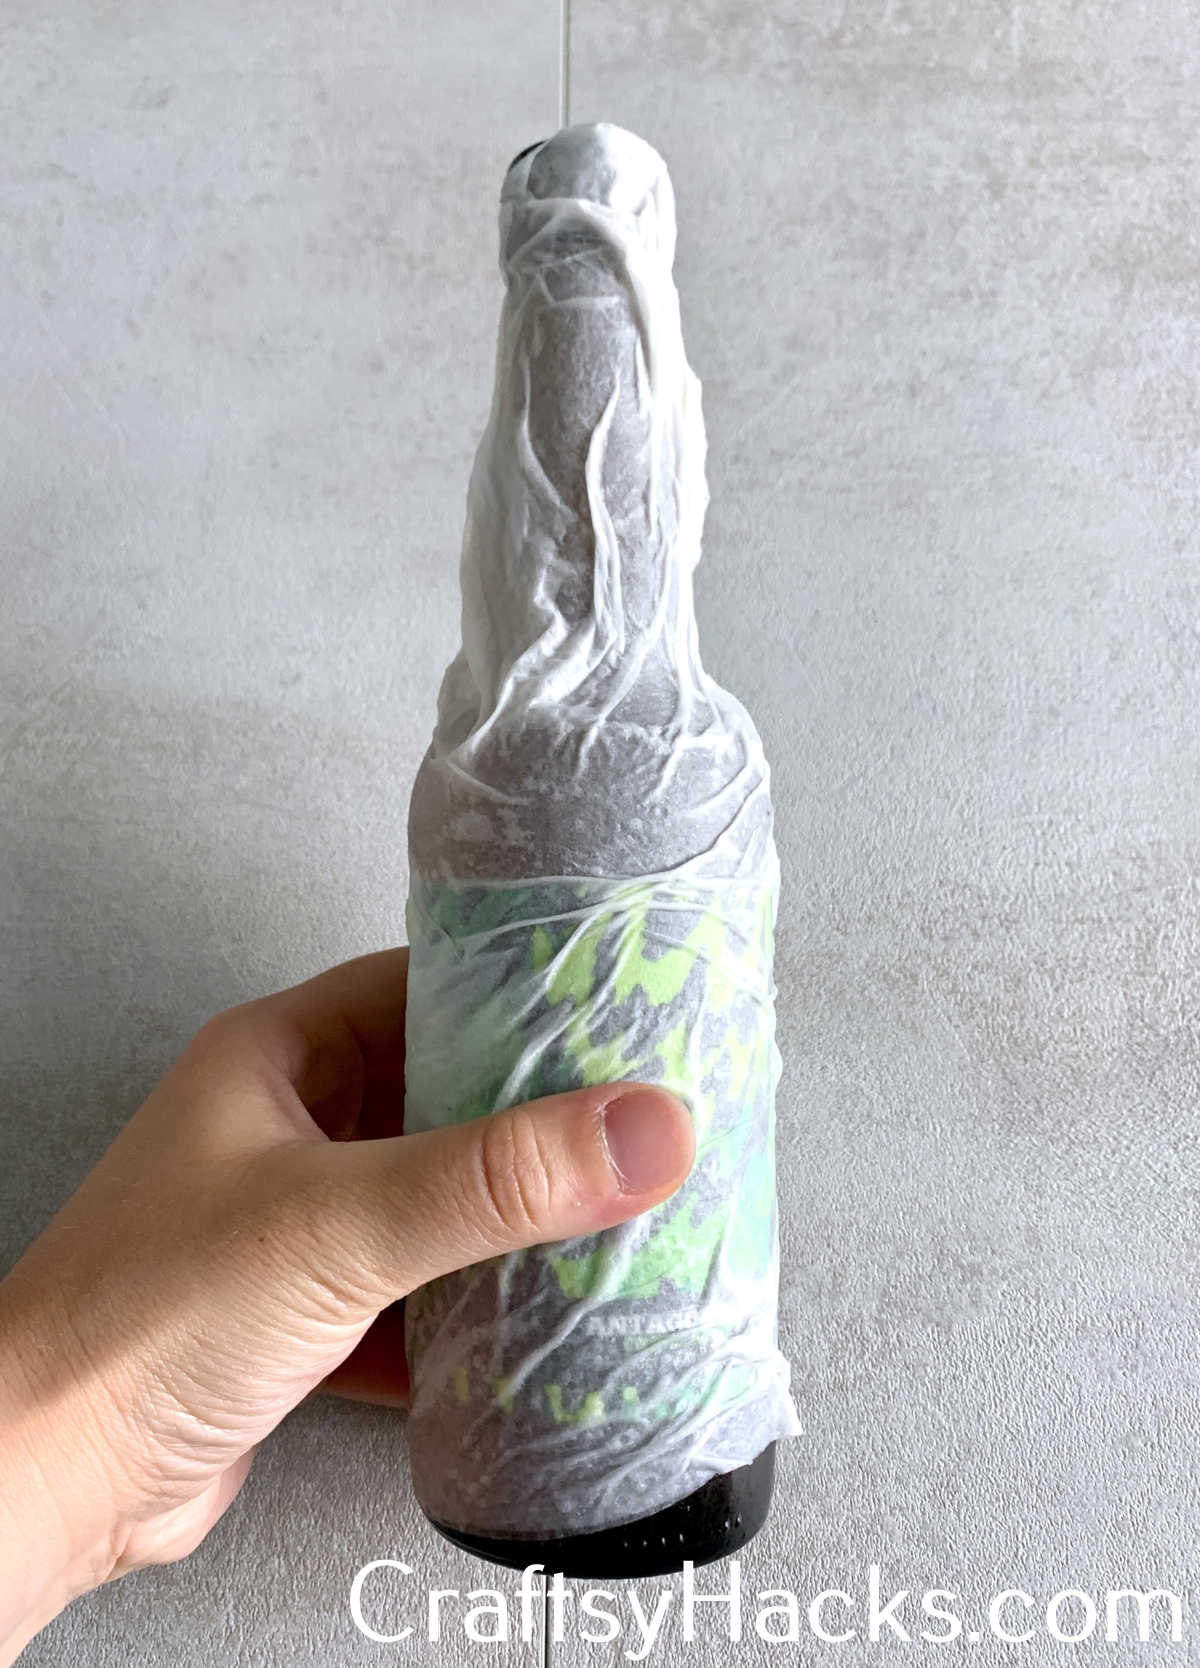 wrap drink in wet napkin for cooling